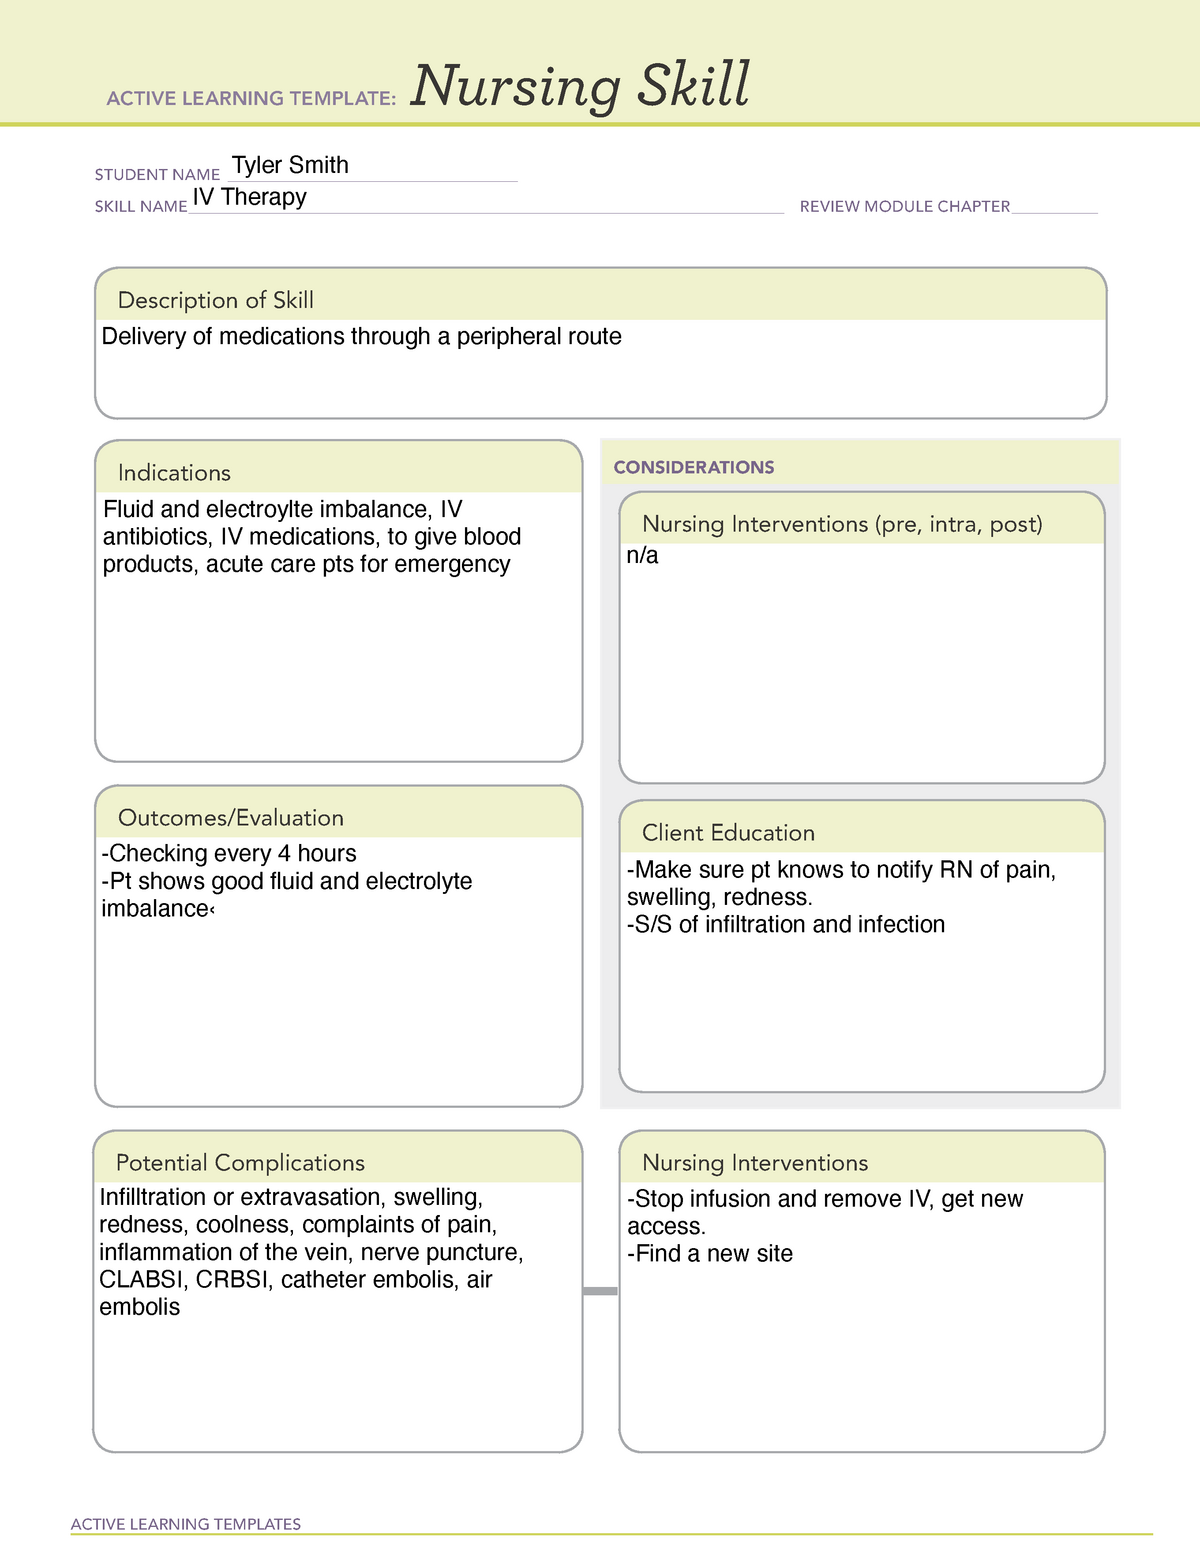 Lab Activity Nursing Skill Template IV Therapy ACTIVE LEARNING